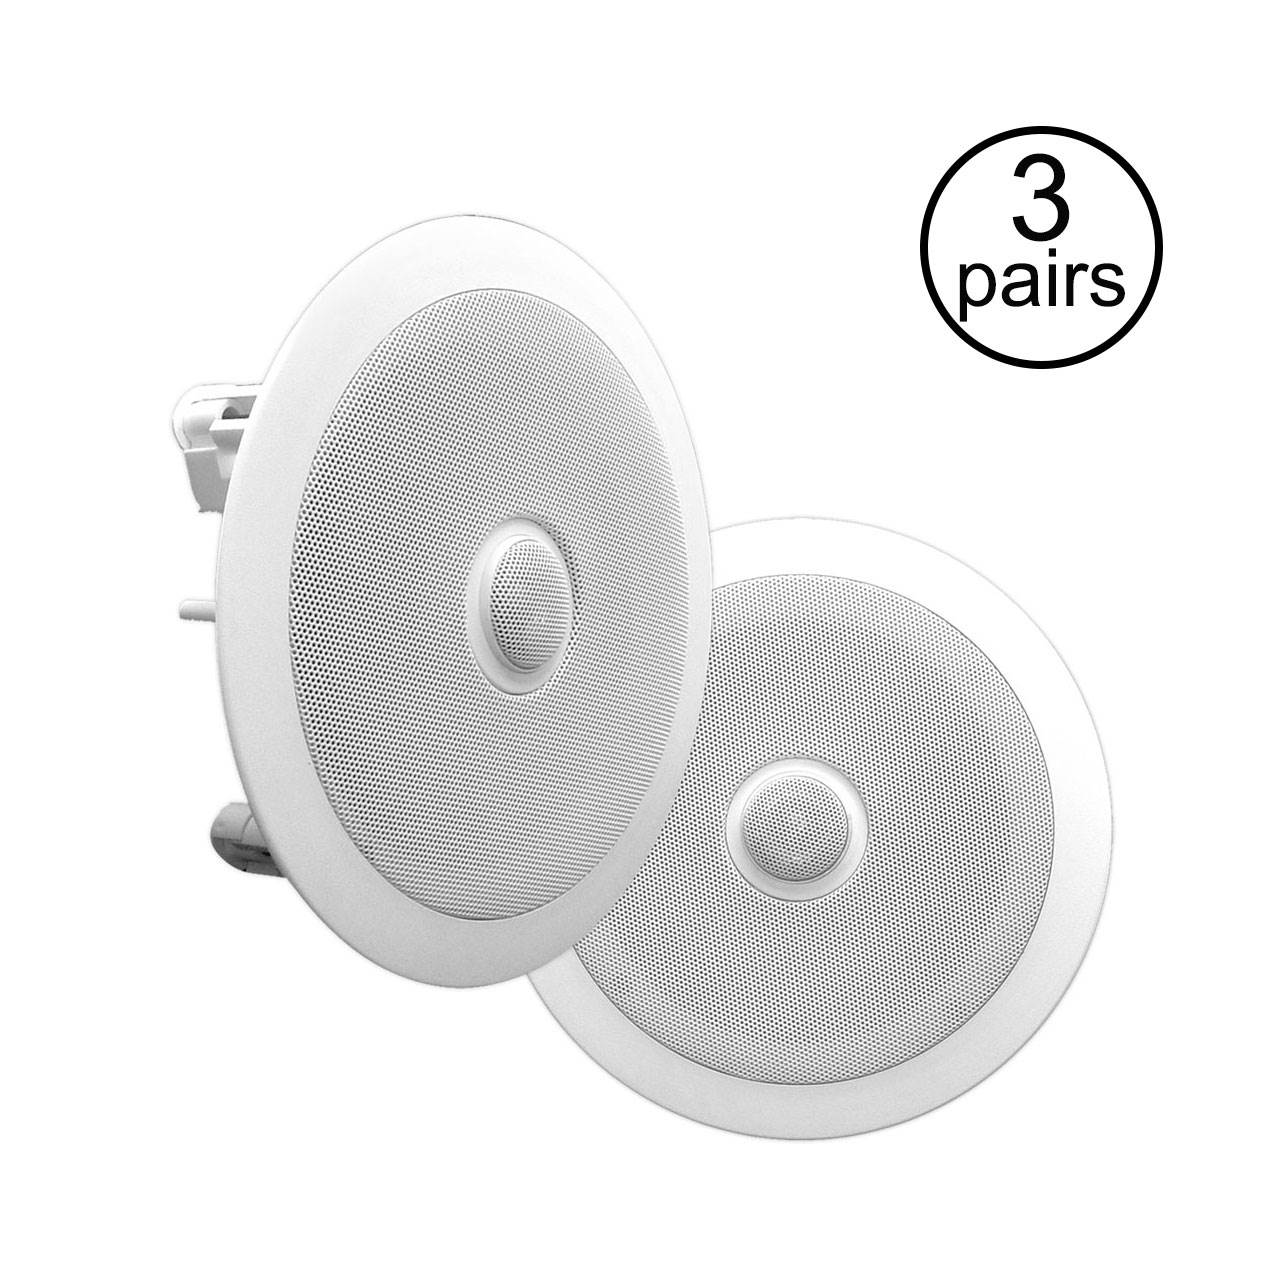 PYLE PRO PDIC80 8 Inch 300 Watt 2 Way In Ceiling/Wall Speakers System (3 Pairs) - image 2 of 8